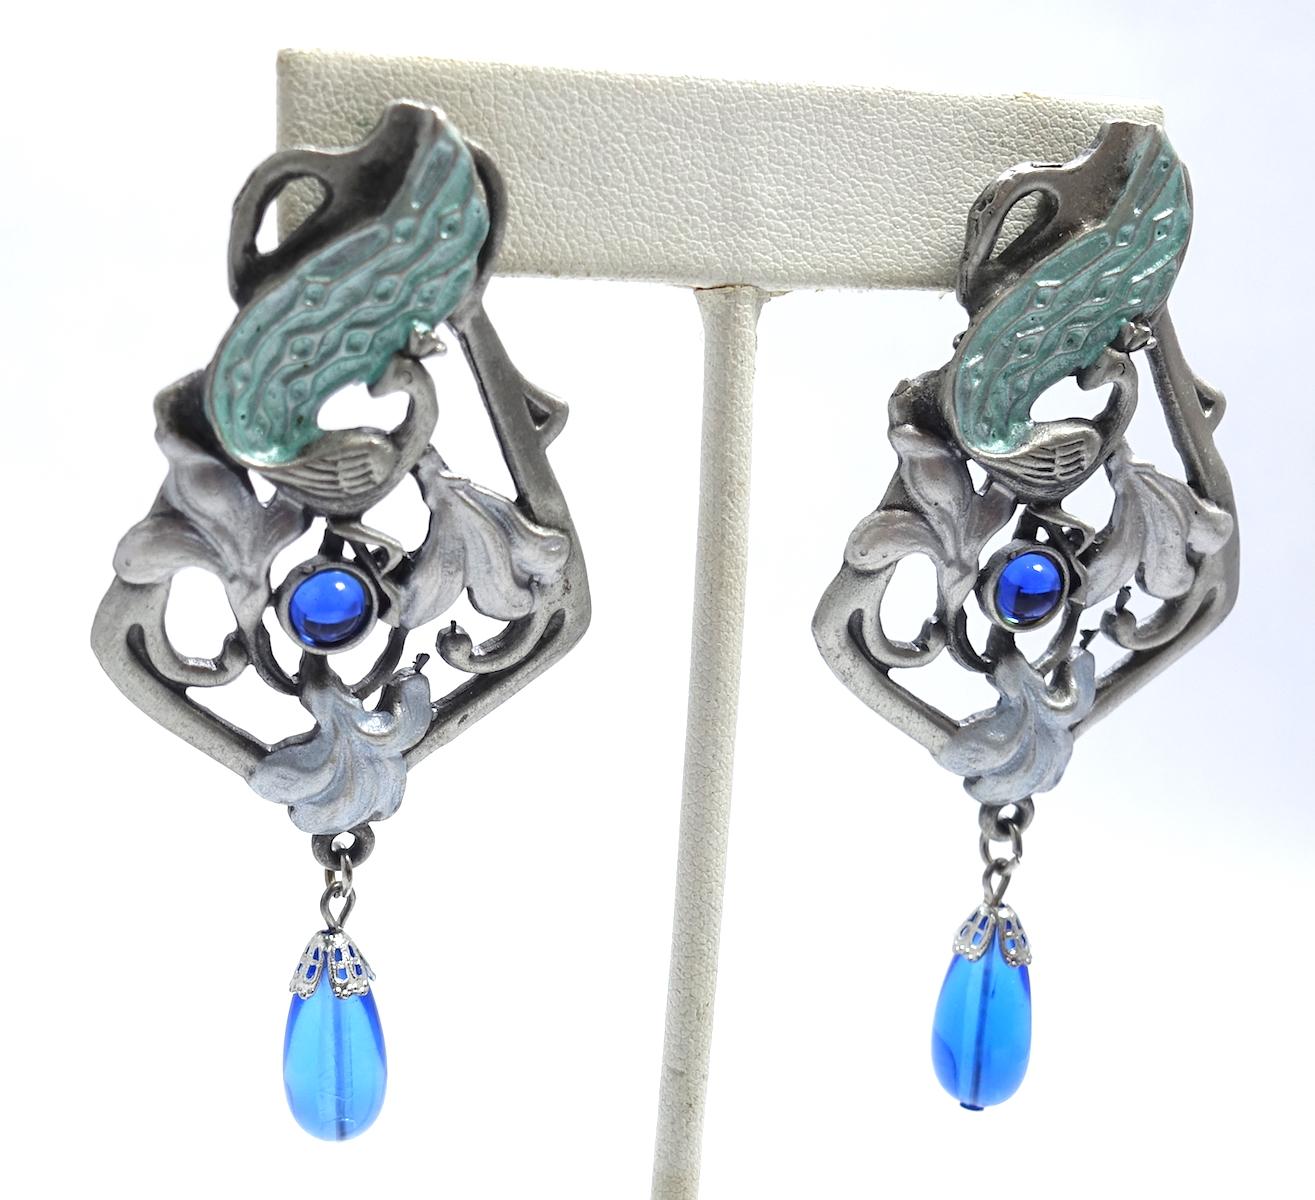 These vintage signed dangling earrings have an intricate designed with leaf type green enameling on silver tone setting with a blue stone dangling at the bottom.  In excellent condition, these clip earrings measure 3” x 1-3/8” and are signed “JJ”.